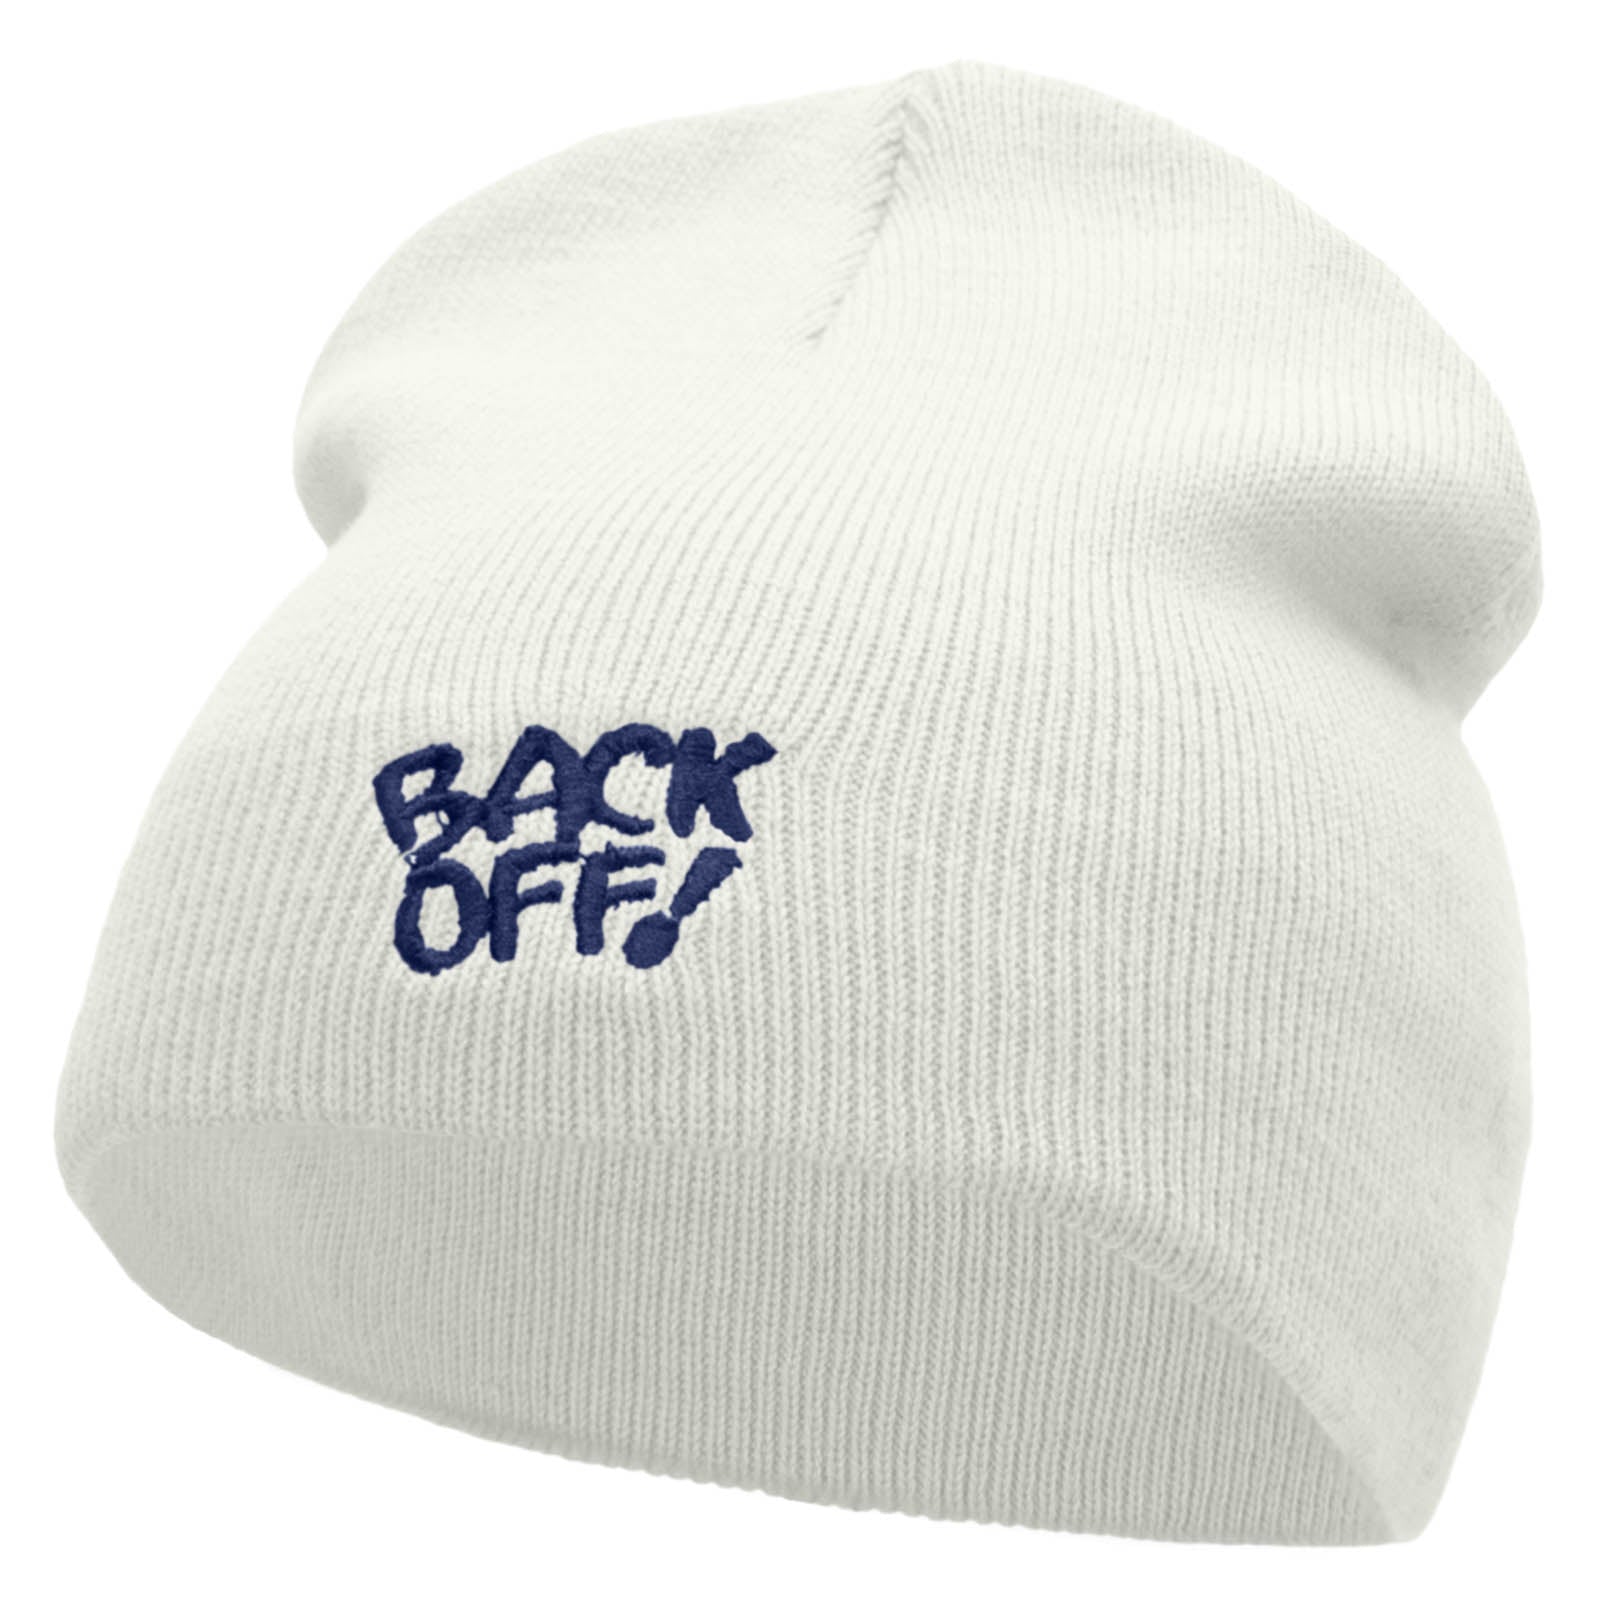 Back Off Saying Embroidered Short Beanie - White OSFM